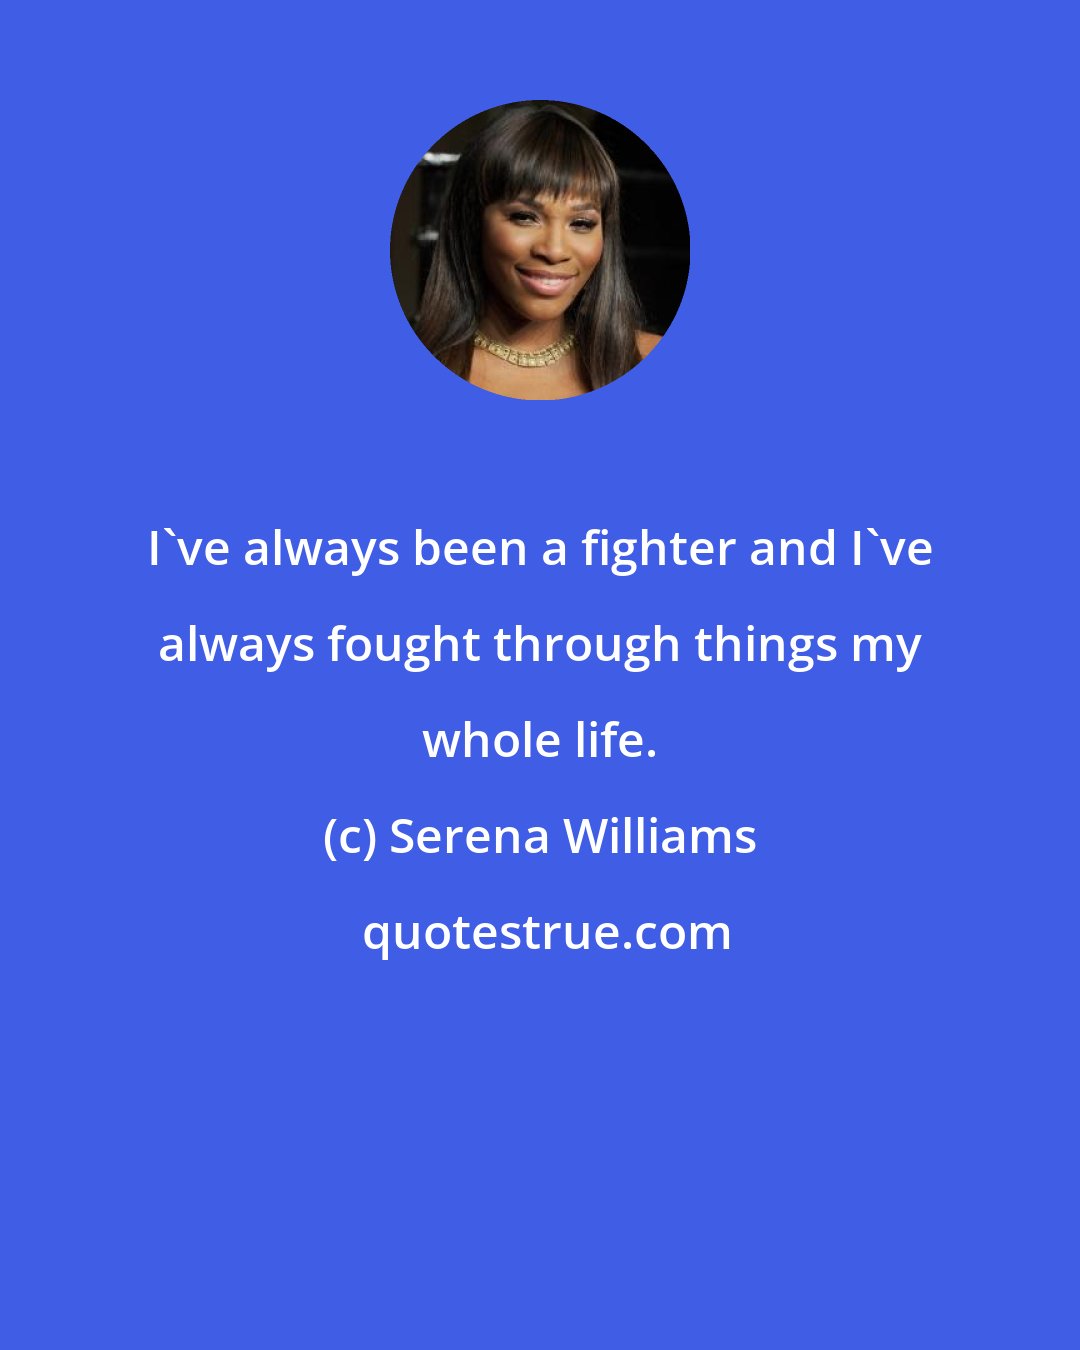 Serena Williams: I've always been a fighter and I've always fought through things my whole life.